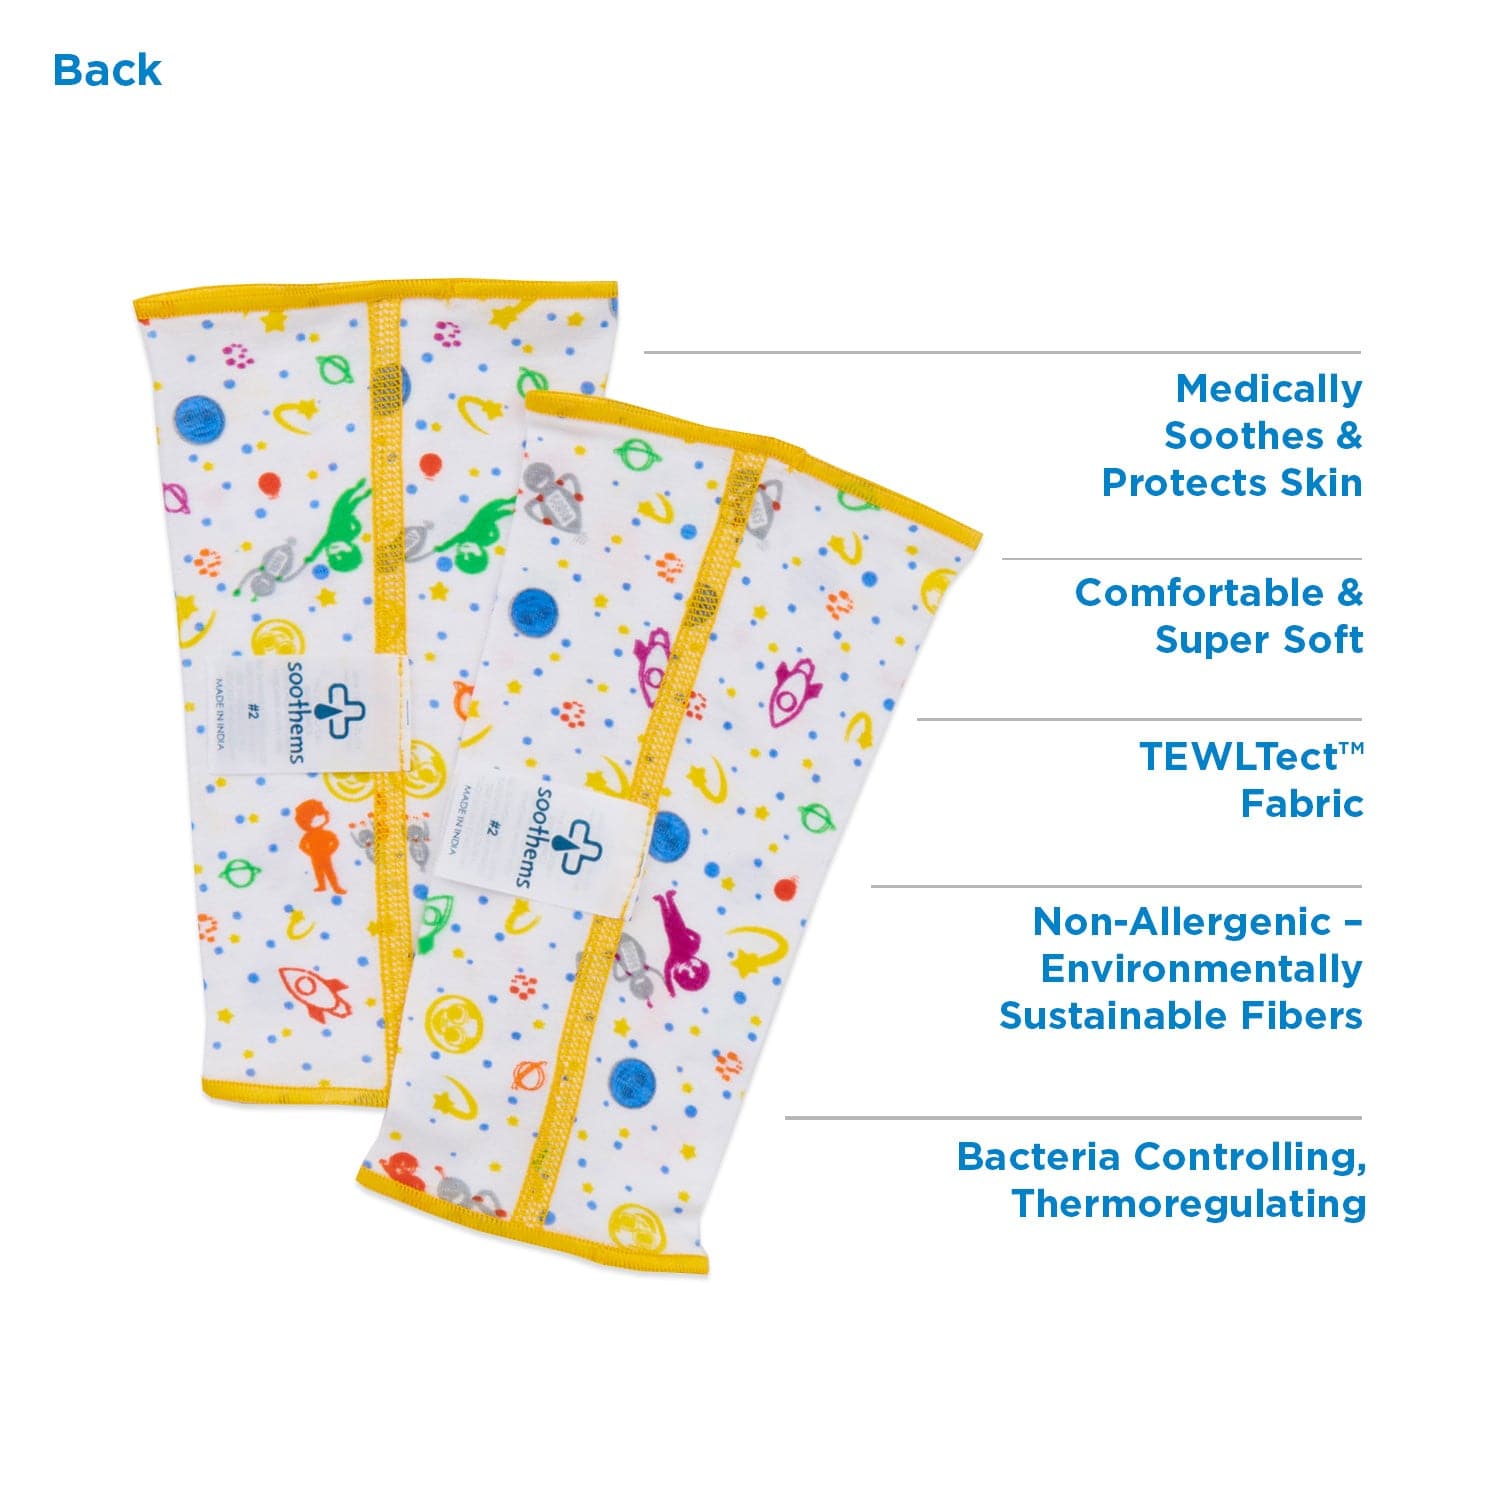 “ Baby Atopic Dermatitis Sleeves and Clothing Stops Scratching from Eczema at Night”